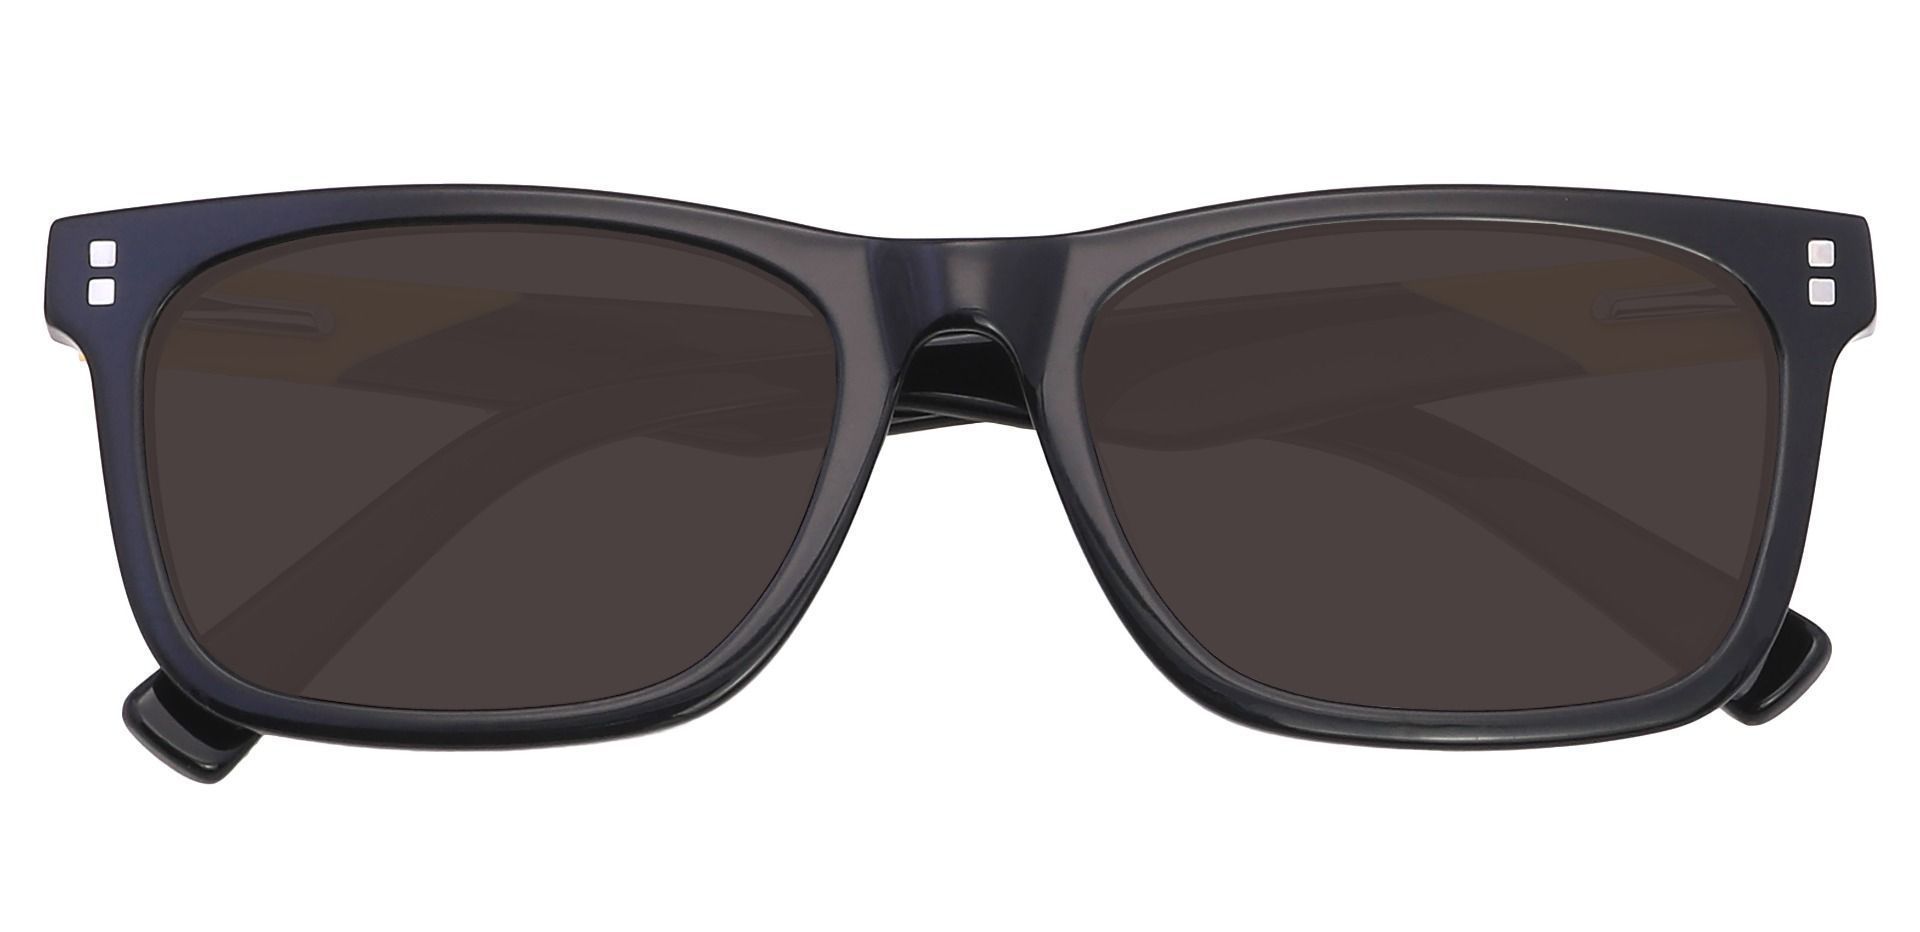 Liberty Rectangle Lined Bifocal Sunglasses - Black Frame With Gray Lenses